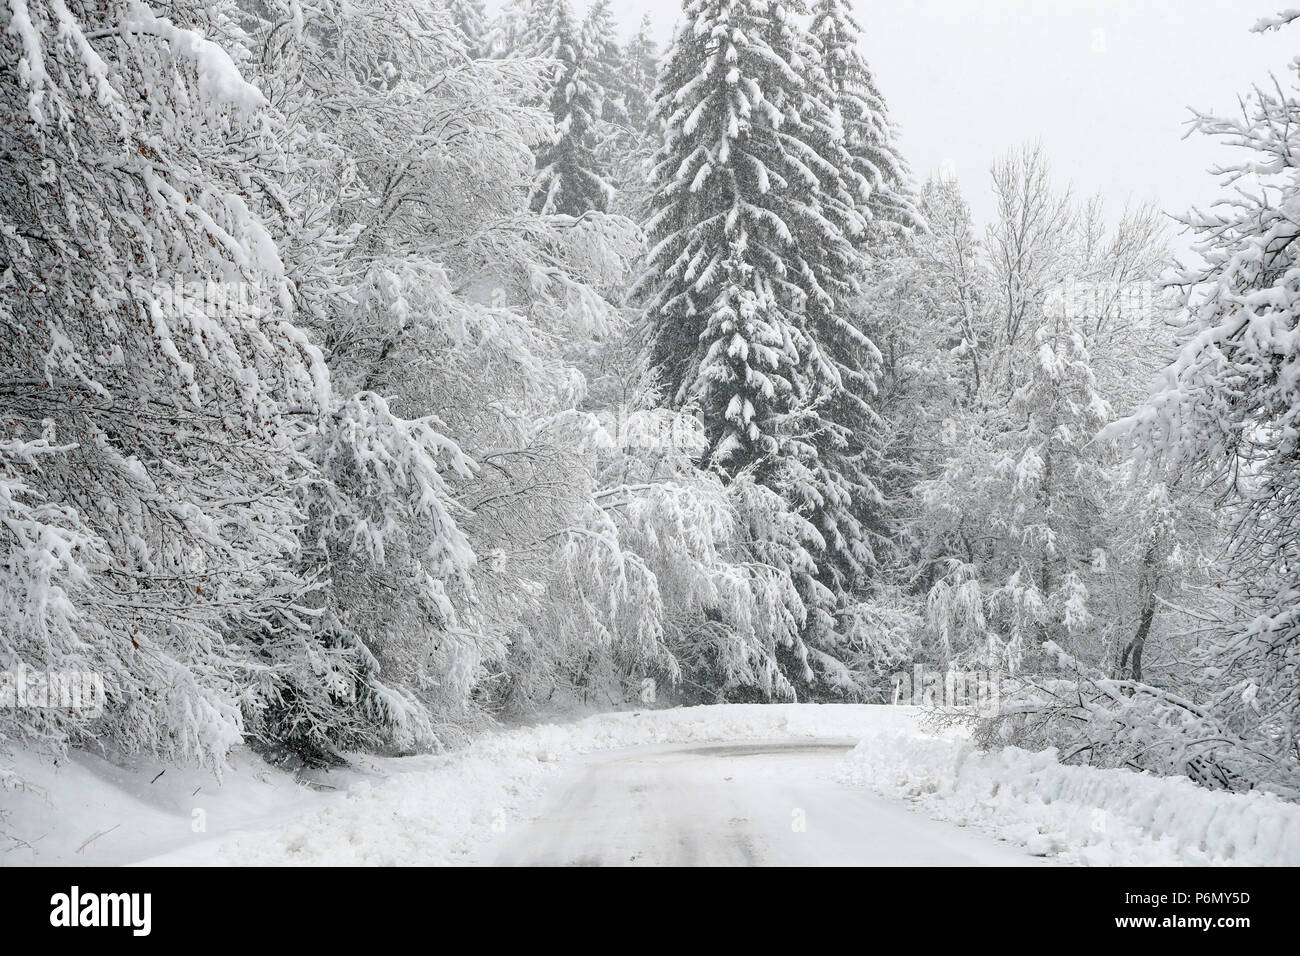 French Alps.  Snow covered fir trees in winter. Mountain road.  Saint-Gervais. France. Stock Photo